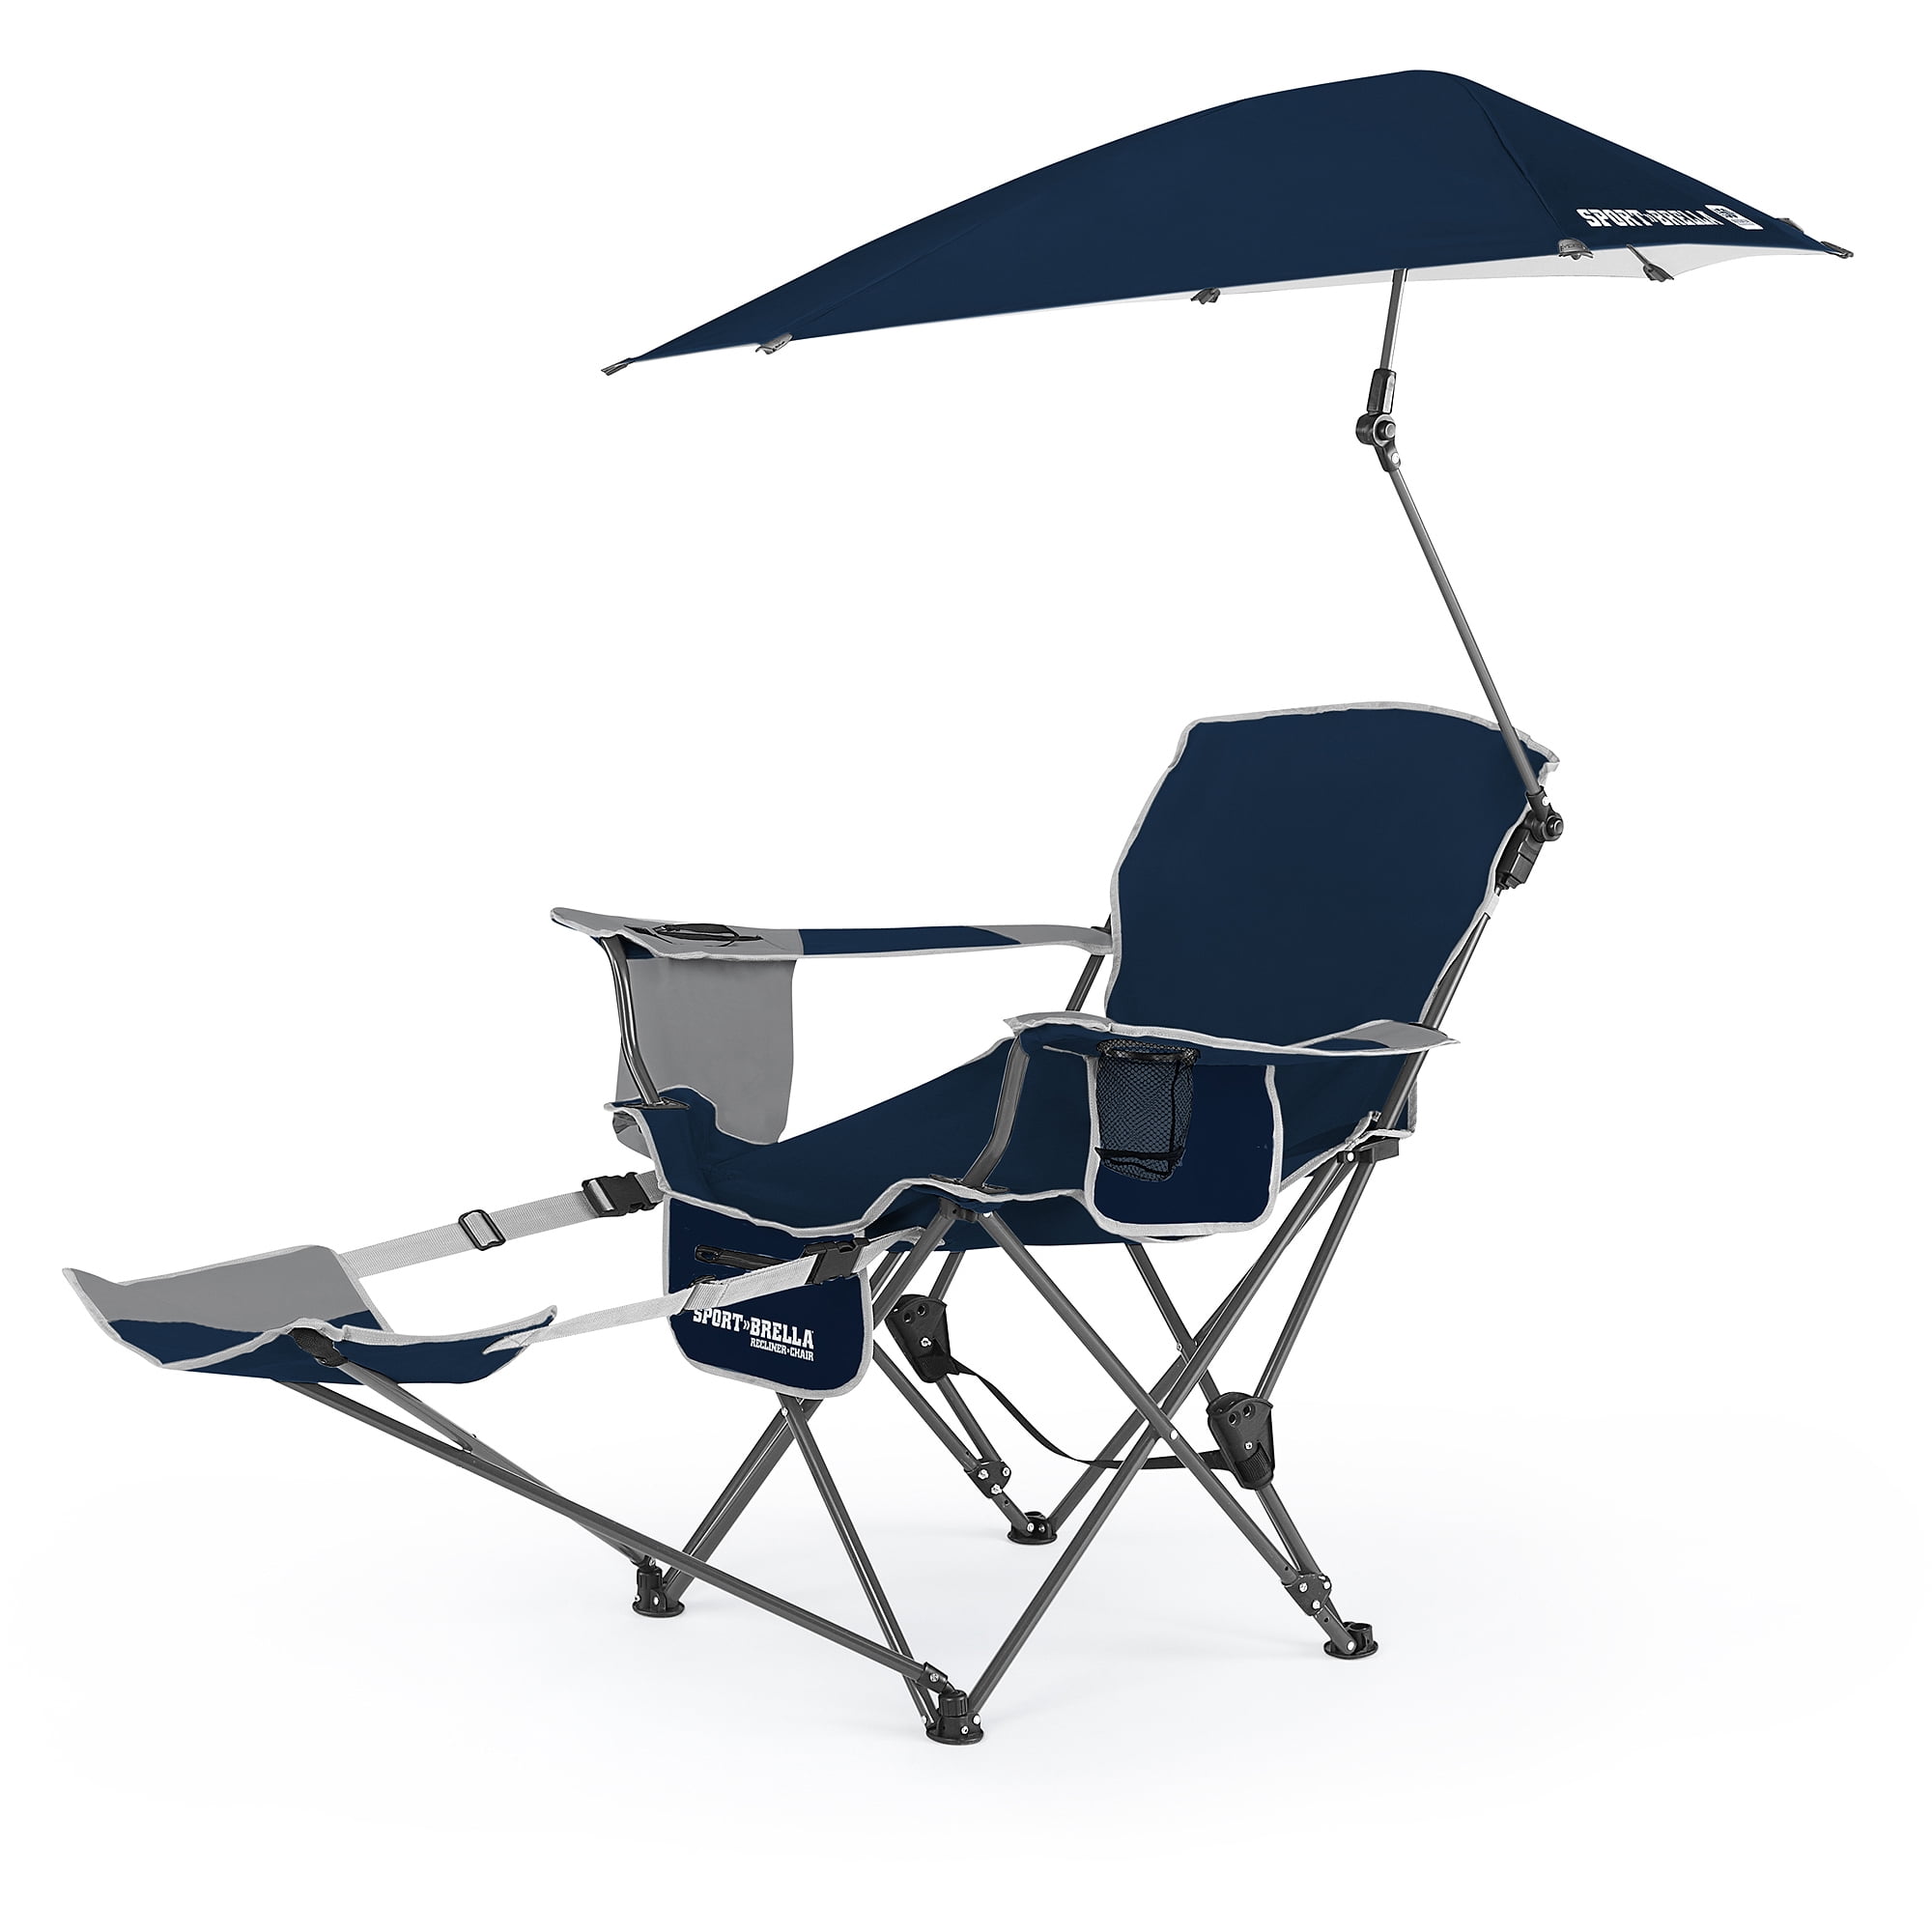 outdoor sports chair